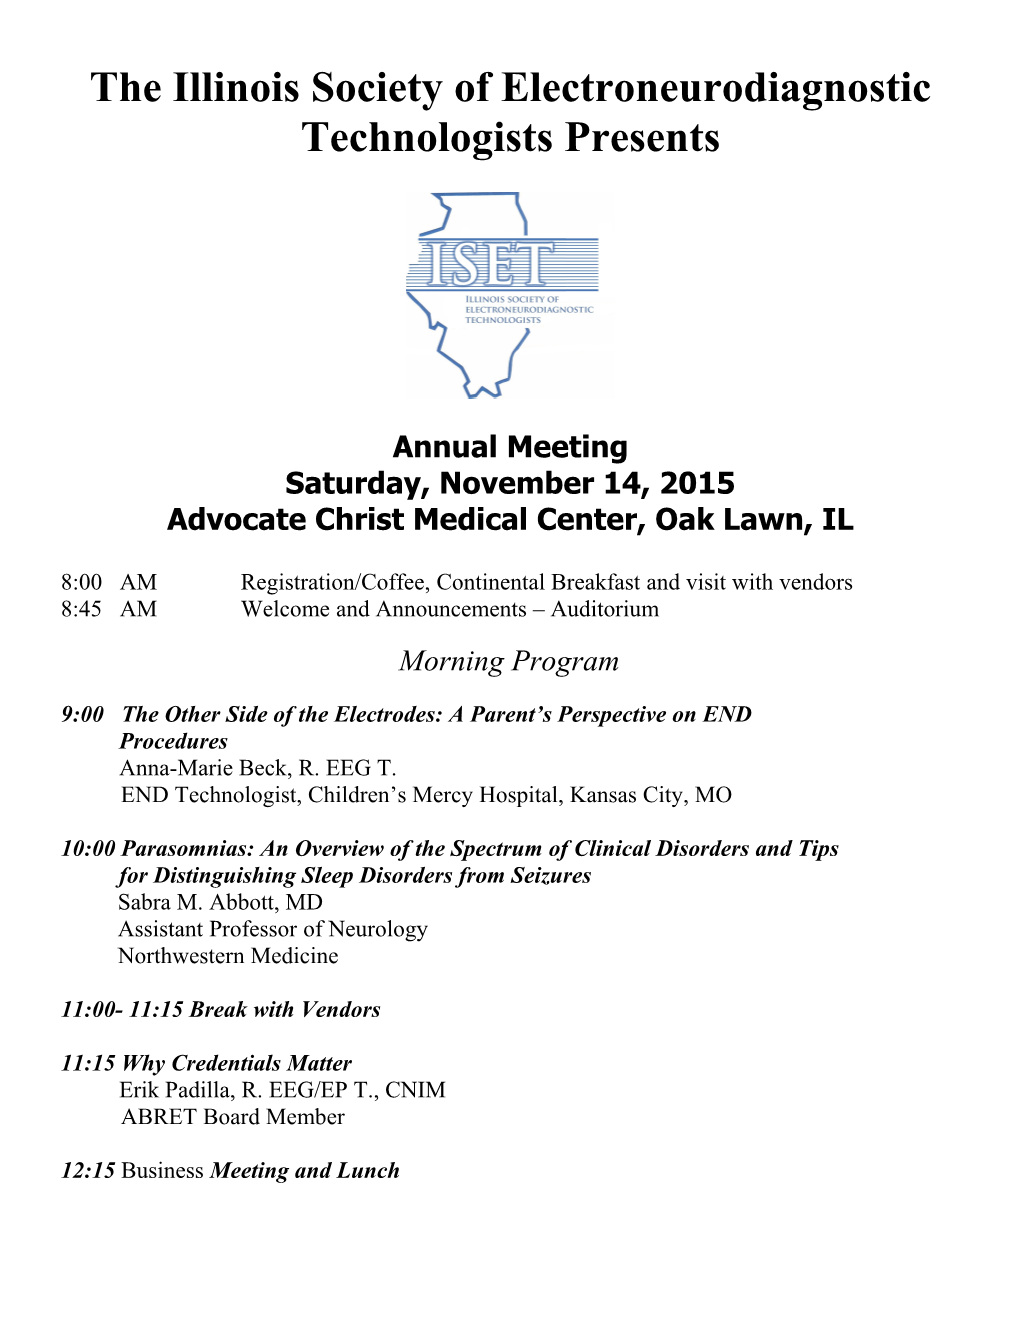 The Illinois Society of Electroneurodiagnostic Technologists Presents